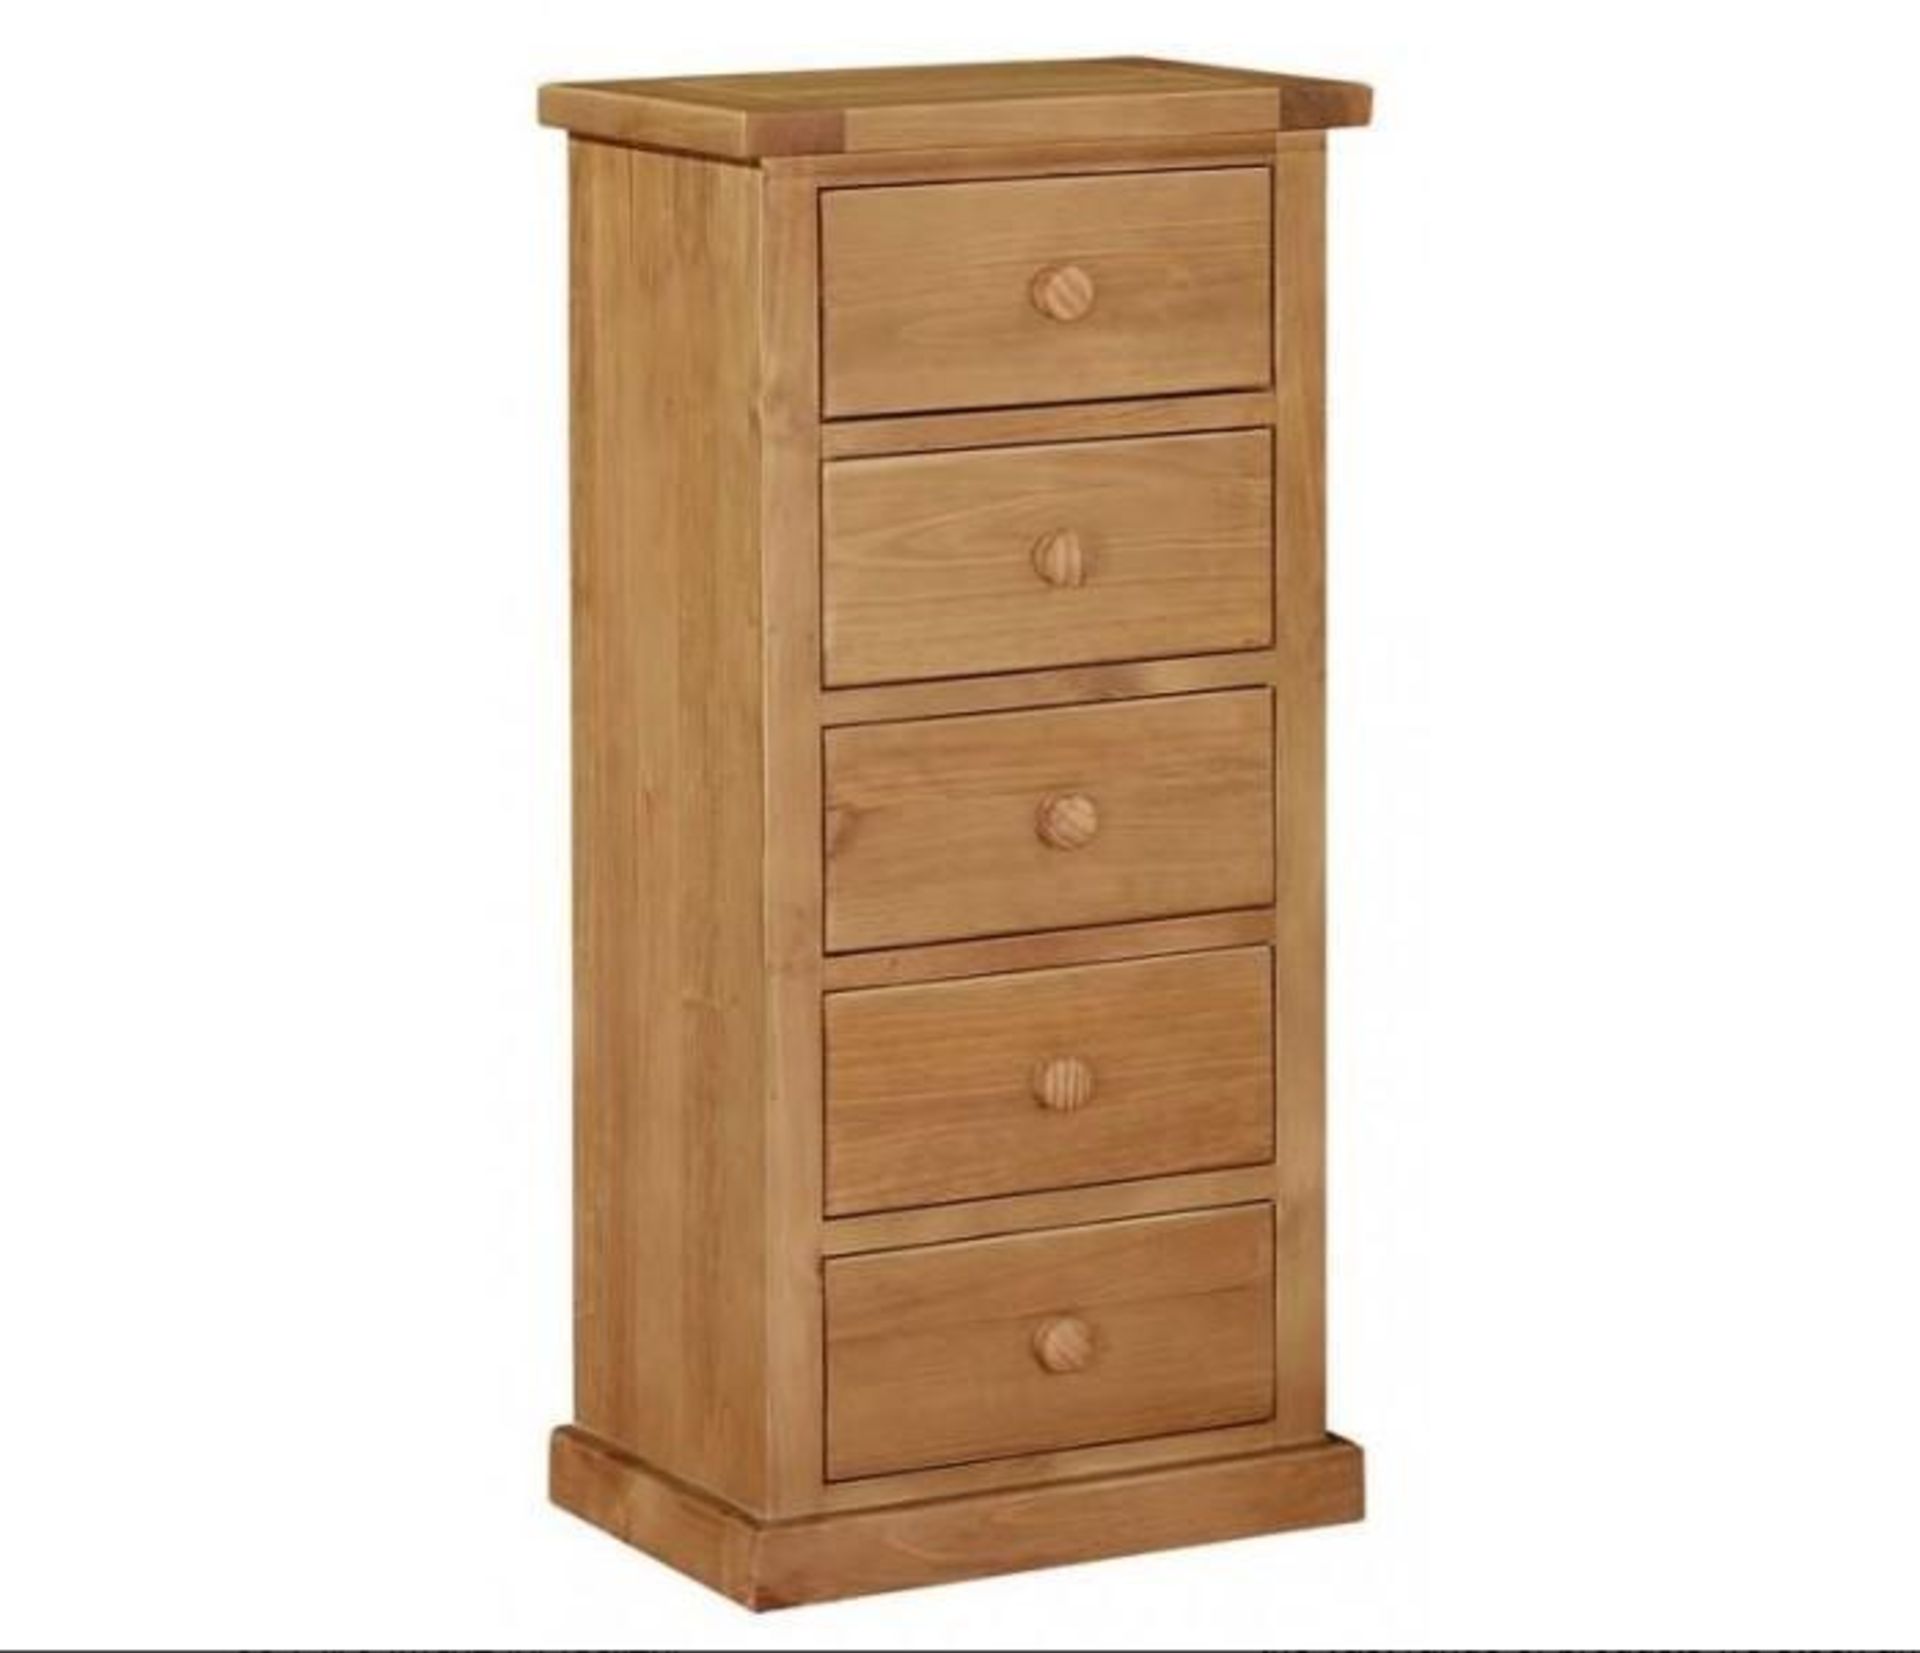 BRAND NEW & BOXED Rutland 5 drawer tall chest